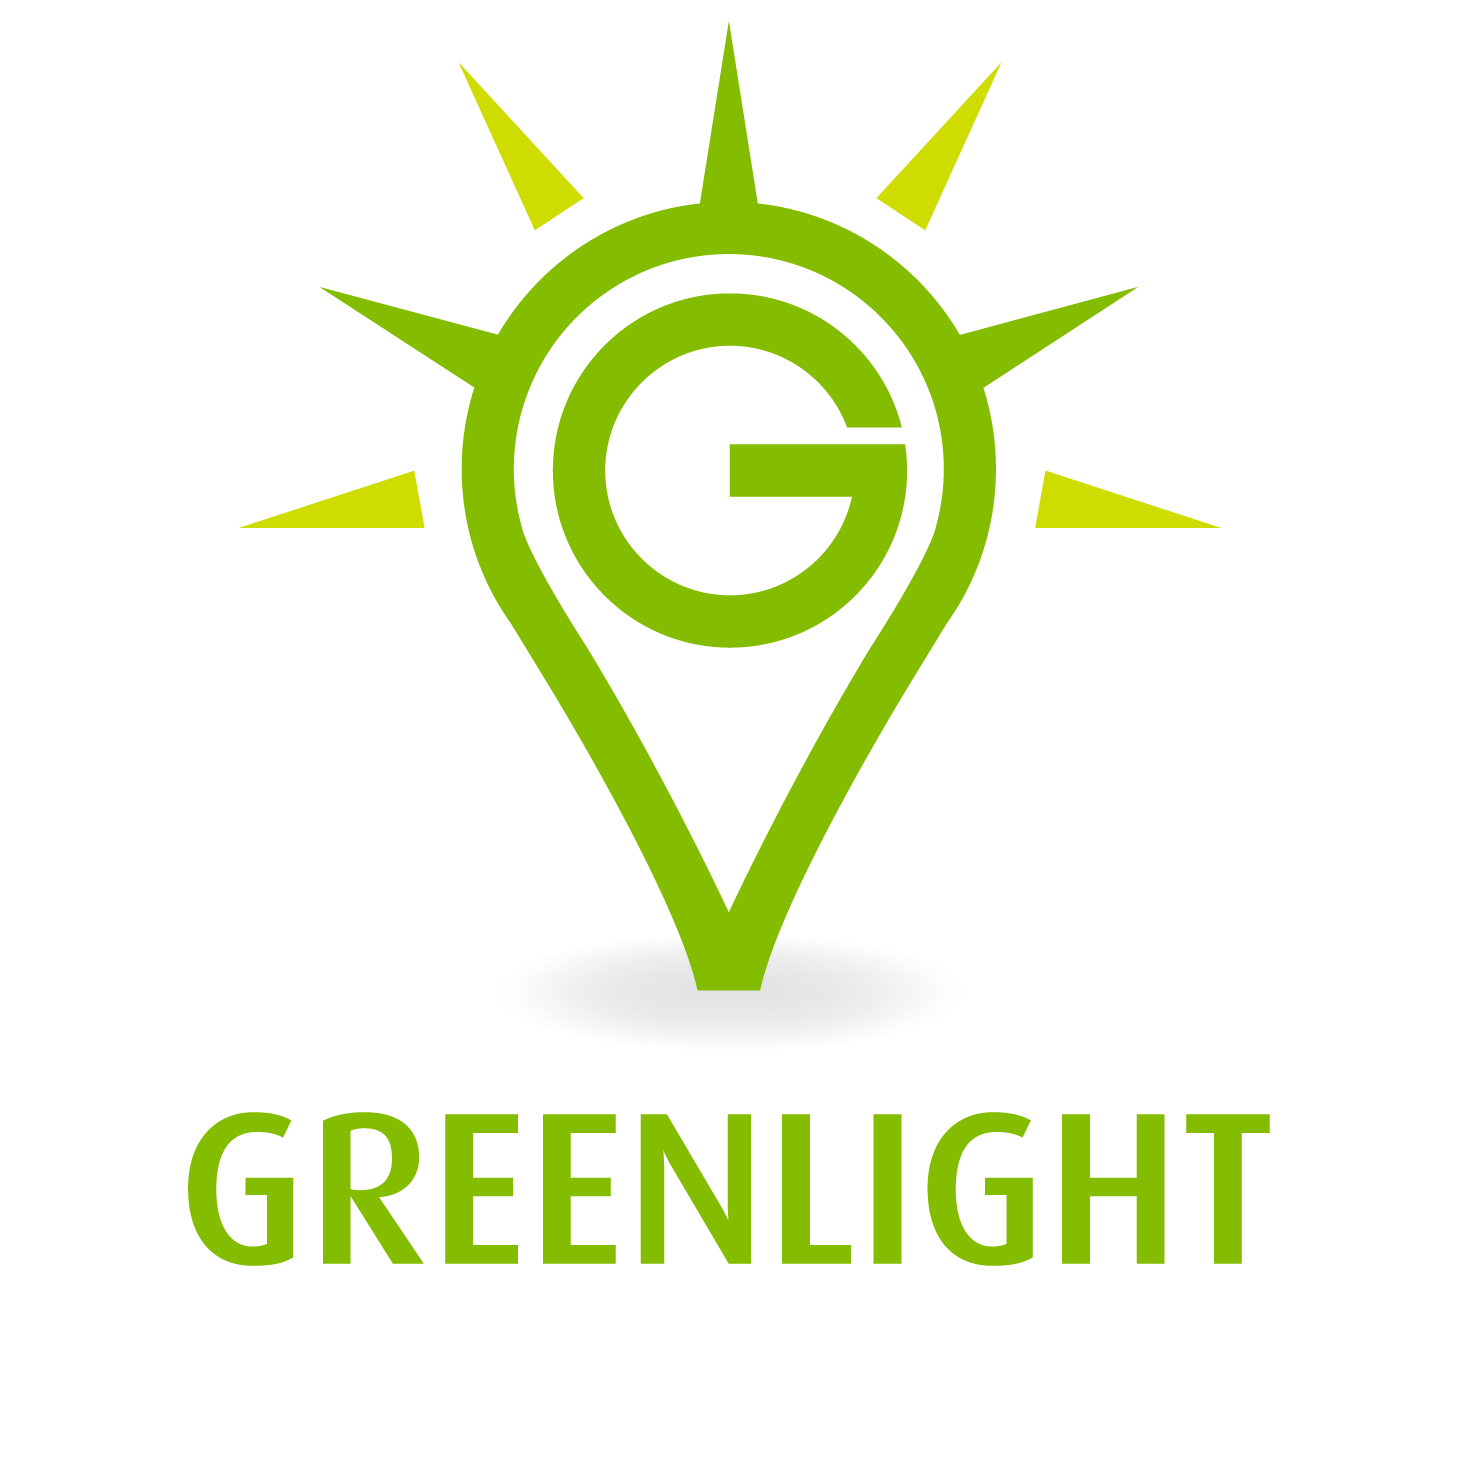 Greenlight Computers Portrait - Alternate that sits on dark background - Links to Greenlight Computers website